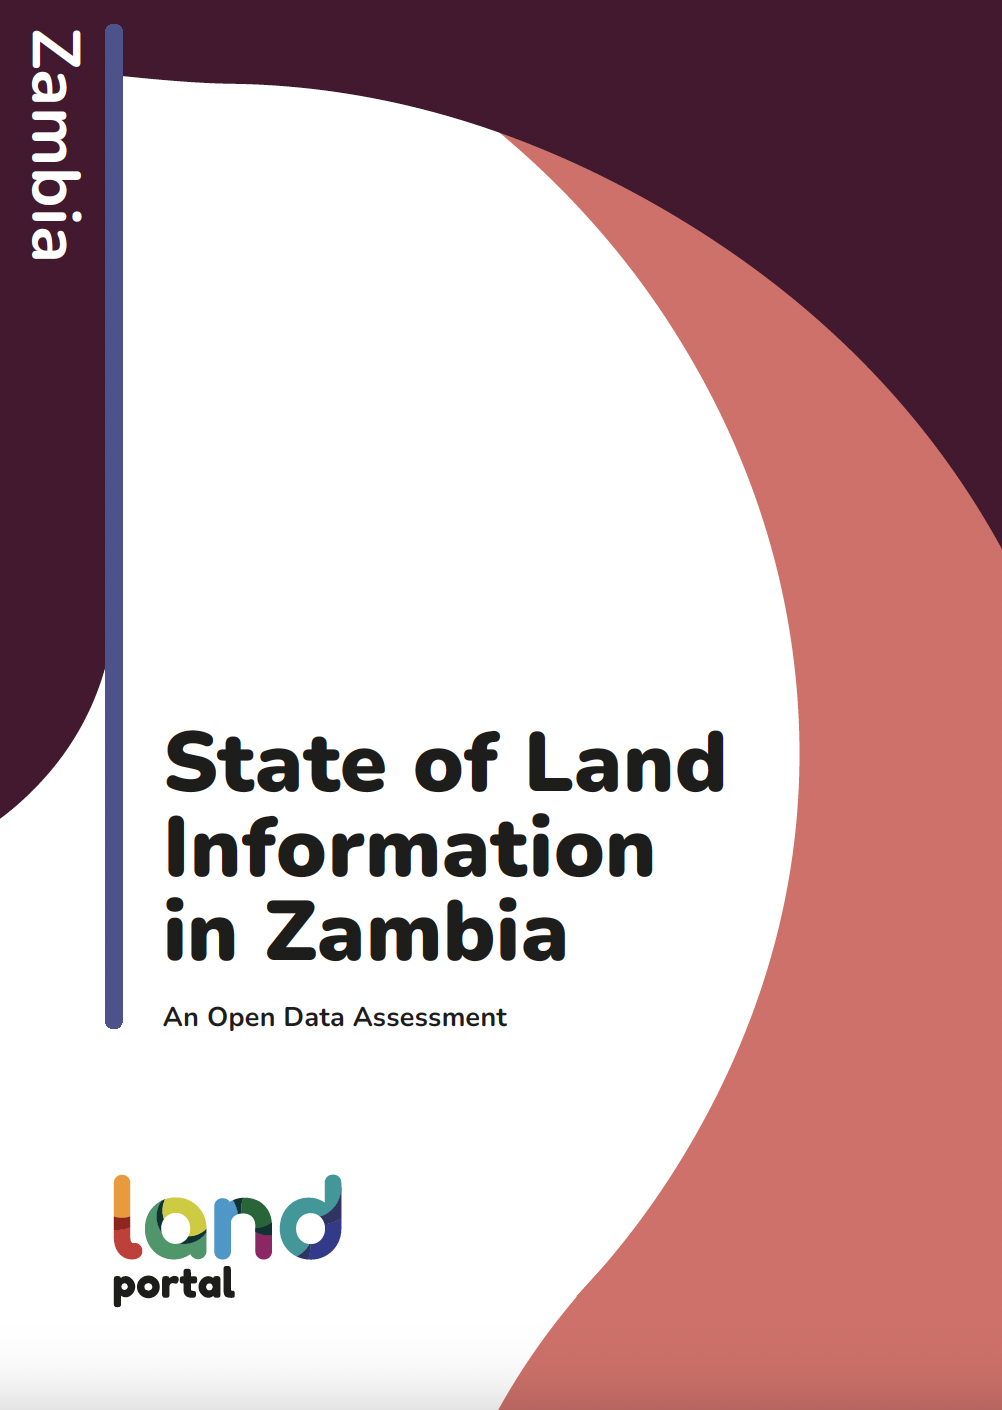 State of Land Information in Zambia